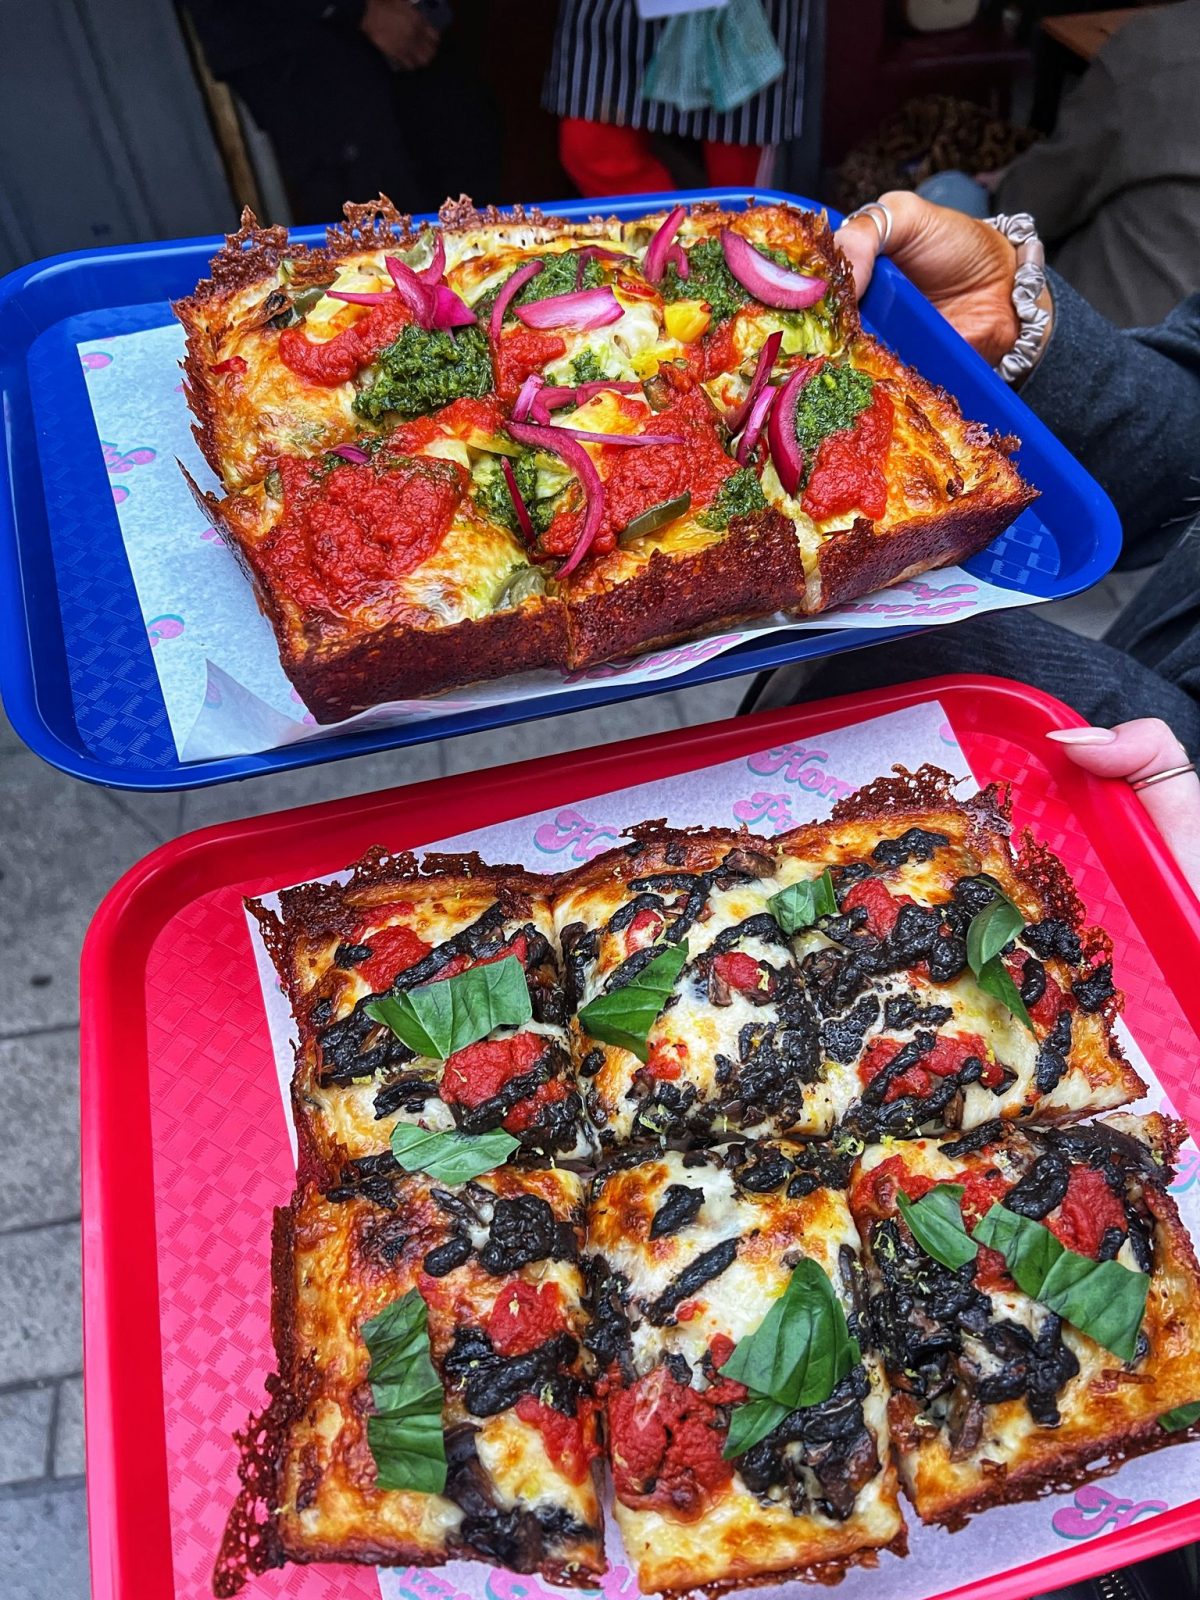 two pizzas being held out on trays.